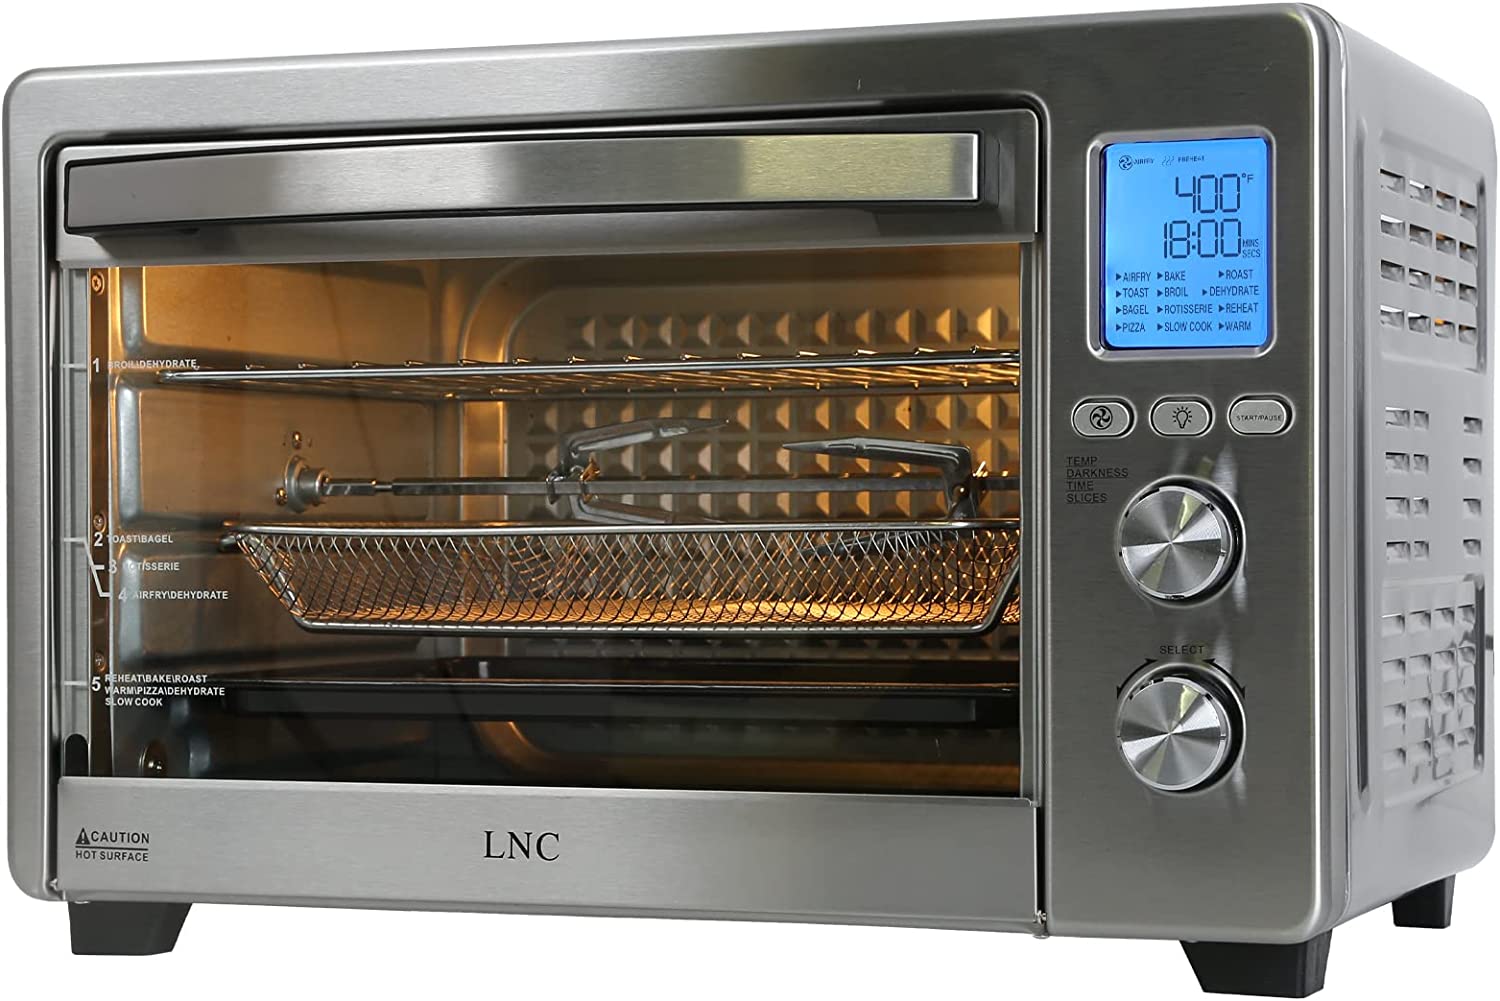 LNC Microwave Toaster Oven